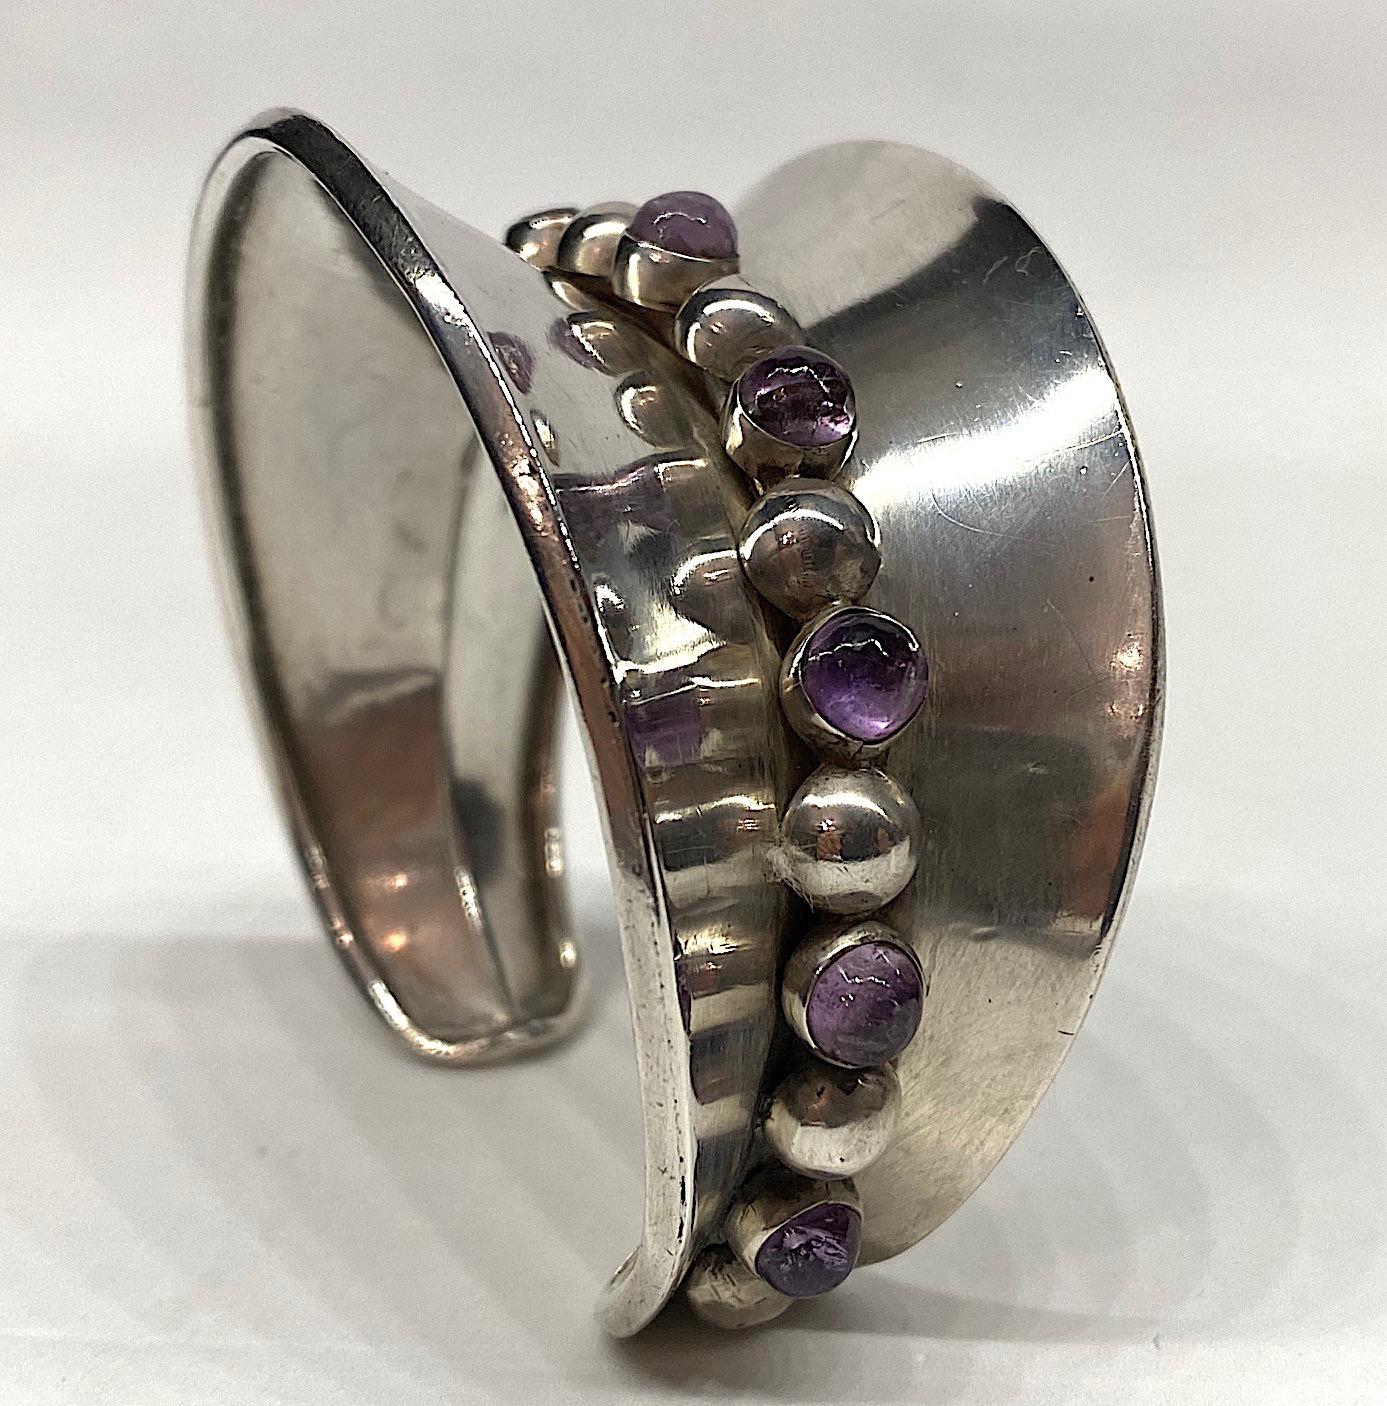 Taxco Mexico 1950s Modernist Sterling and Amethyst Cuff Bracelet 4